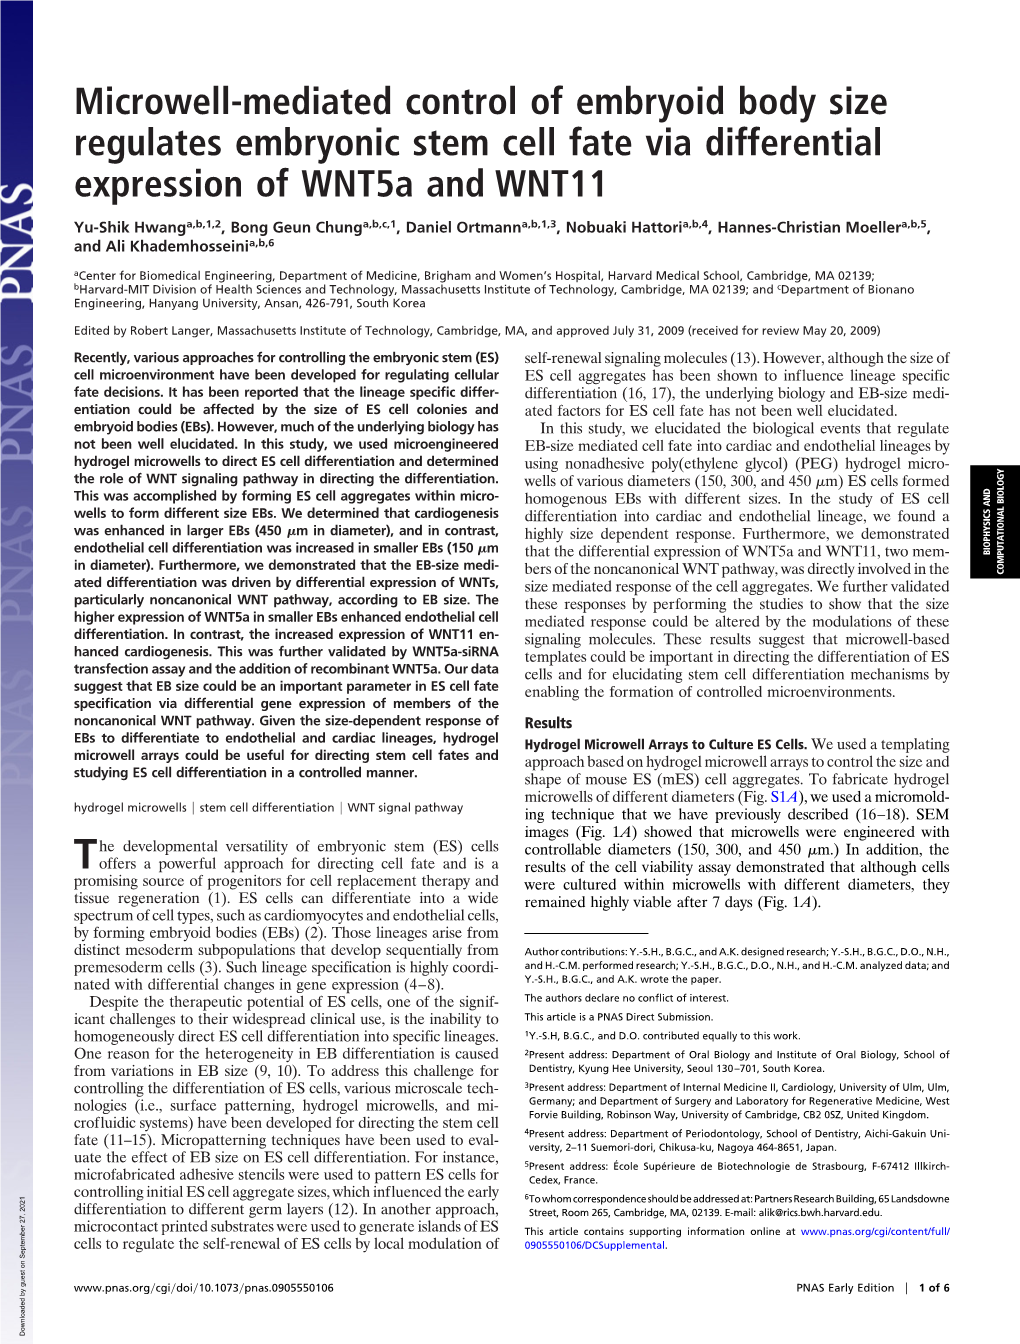 Microwell-Mediated Control of Embryoid Body Size Regulates Embryonic Stem Cell Fate Via Differential Expression of Wnt5a and WNT11